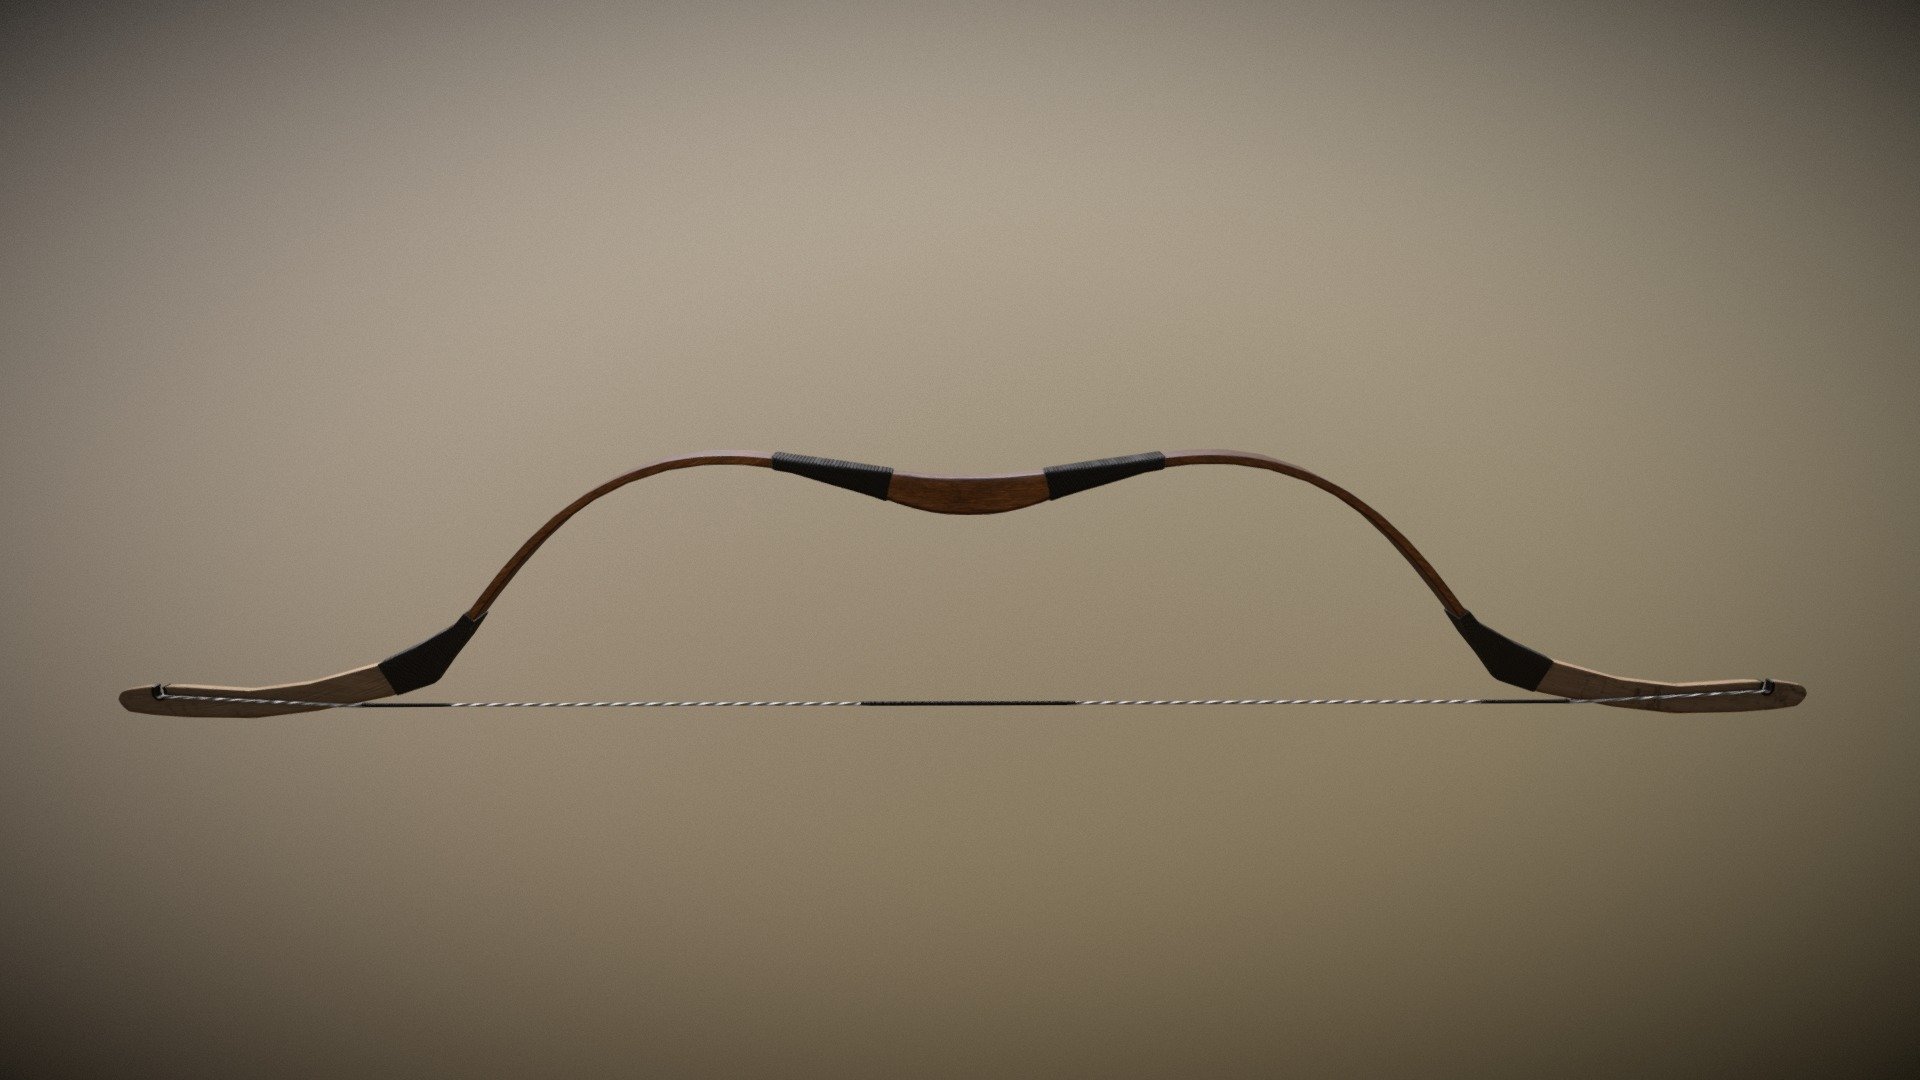 Traditional Recurve Bow